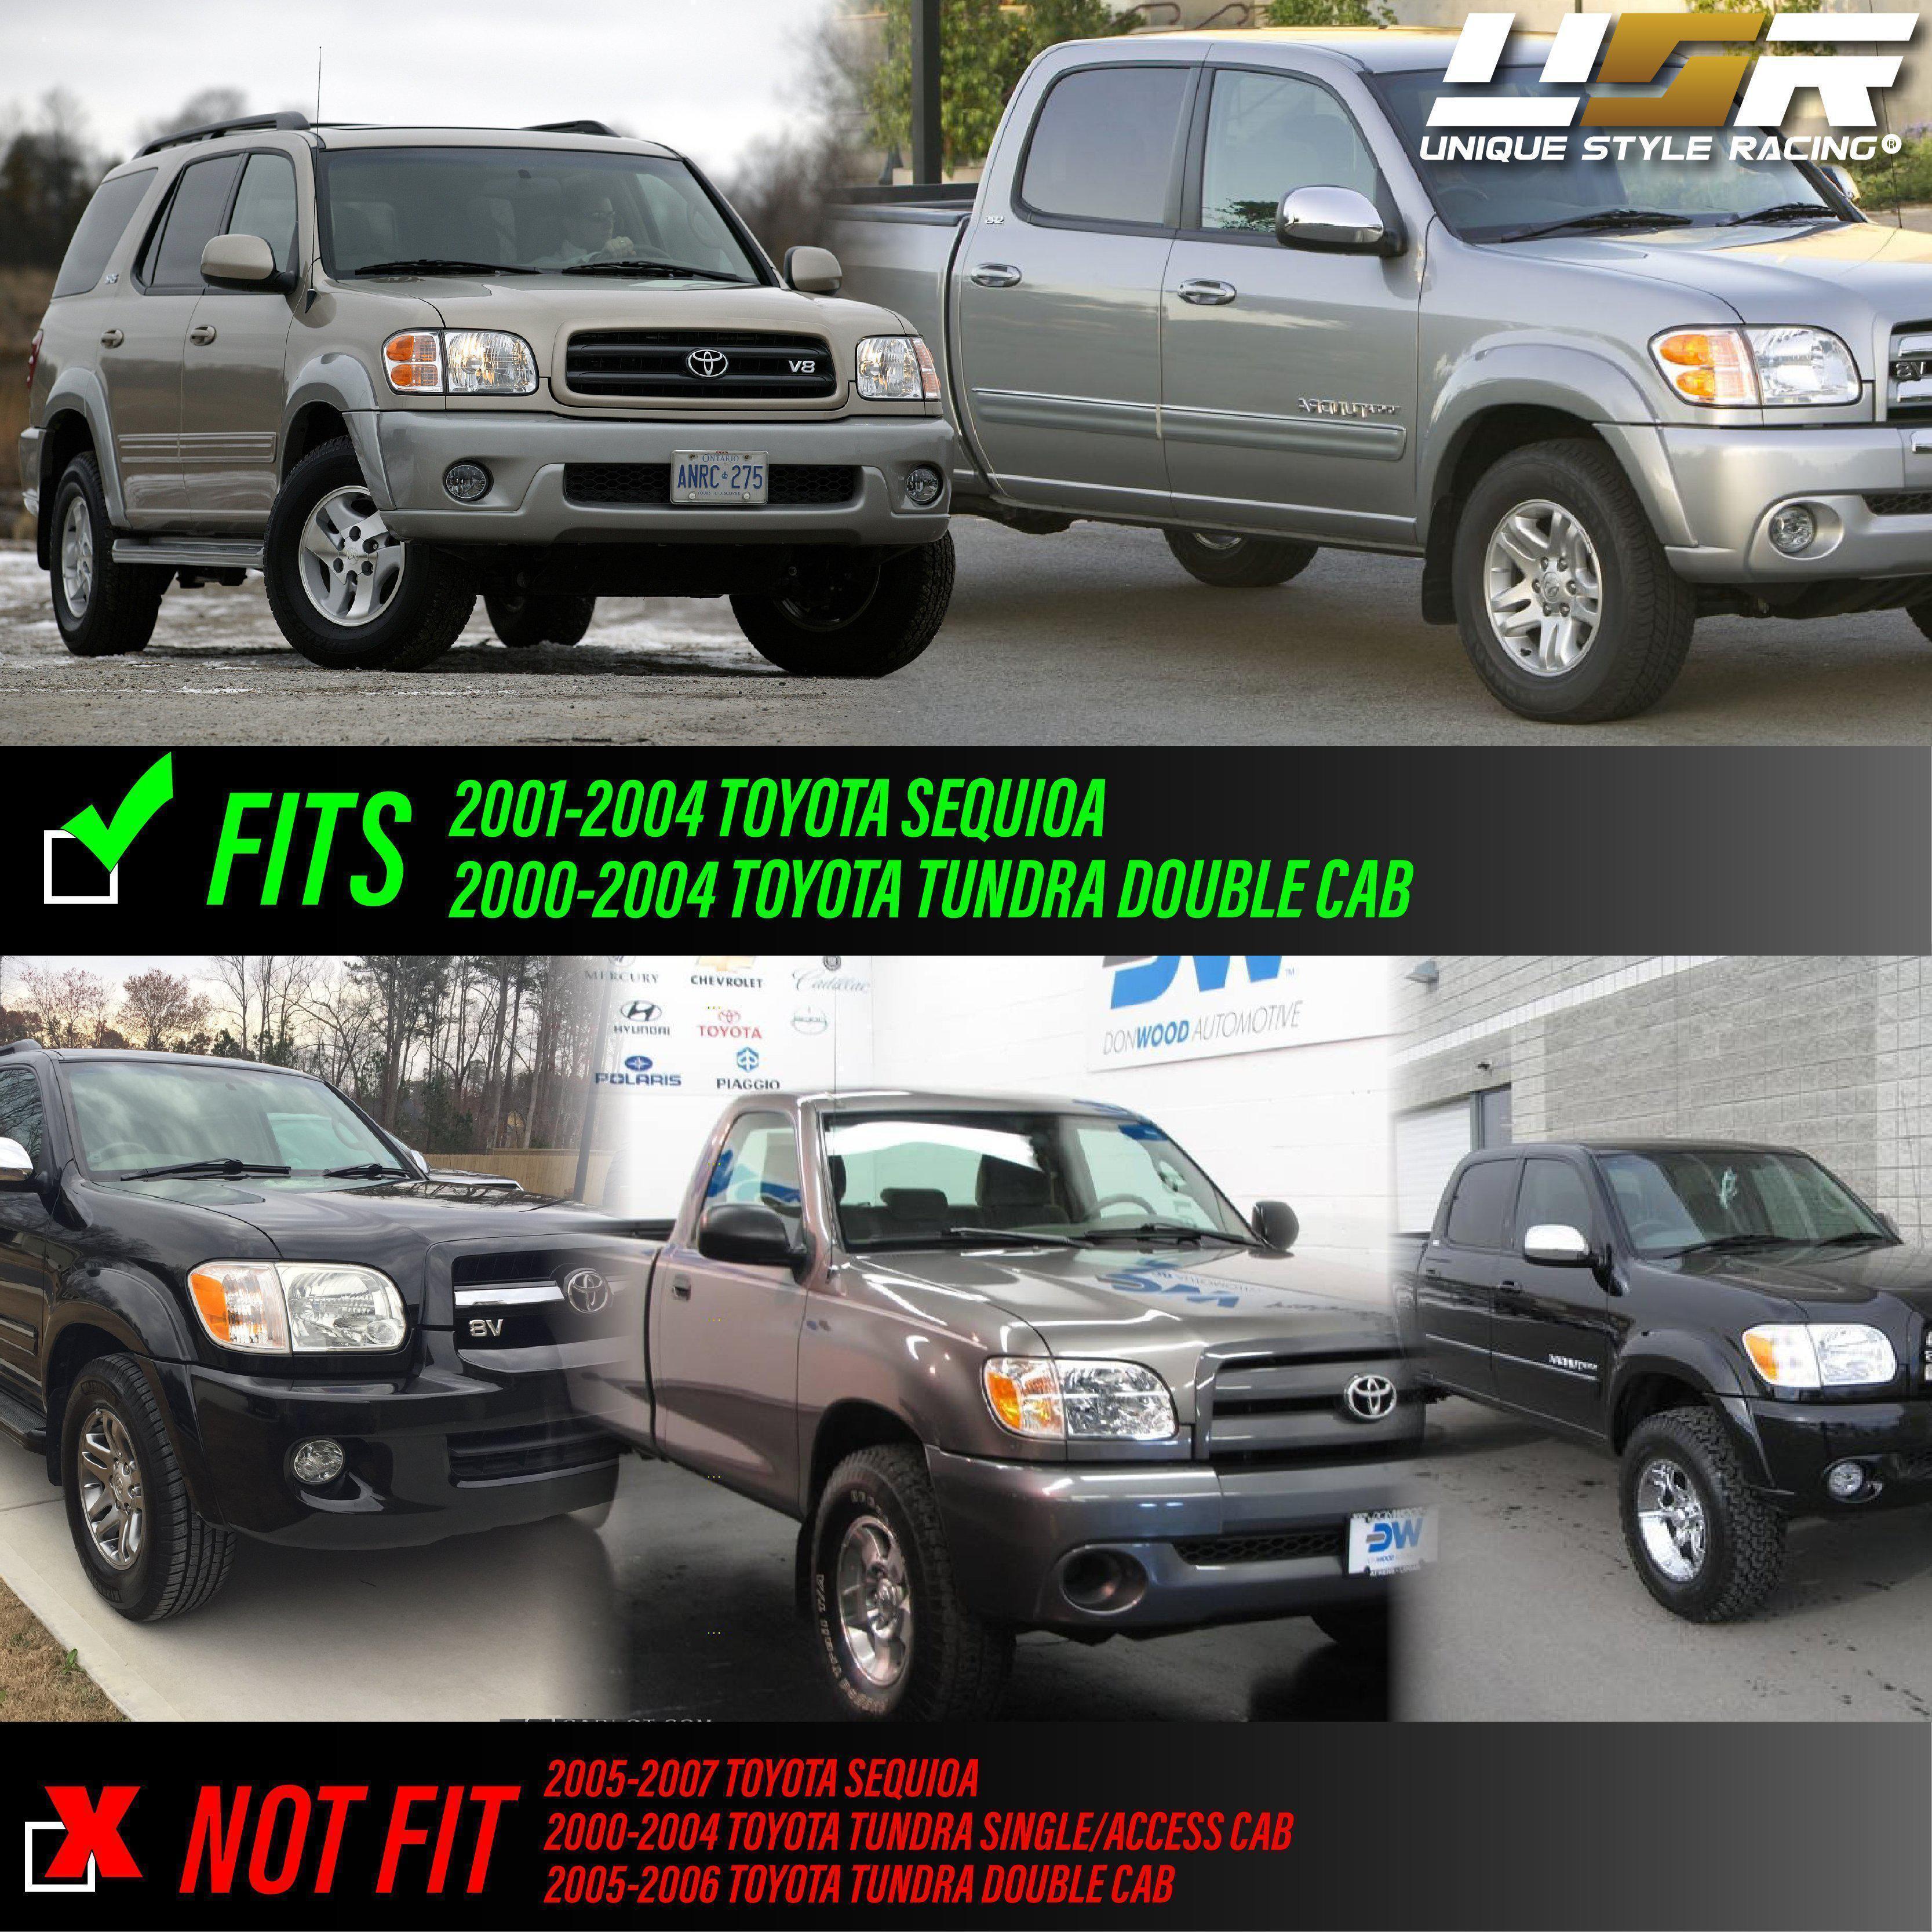 2001-2004 Toyota Sequoia / 2000-2004 Toyota Tundra Double Cab Only